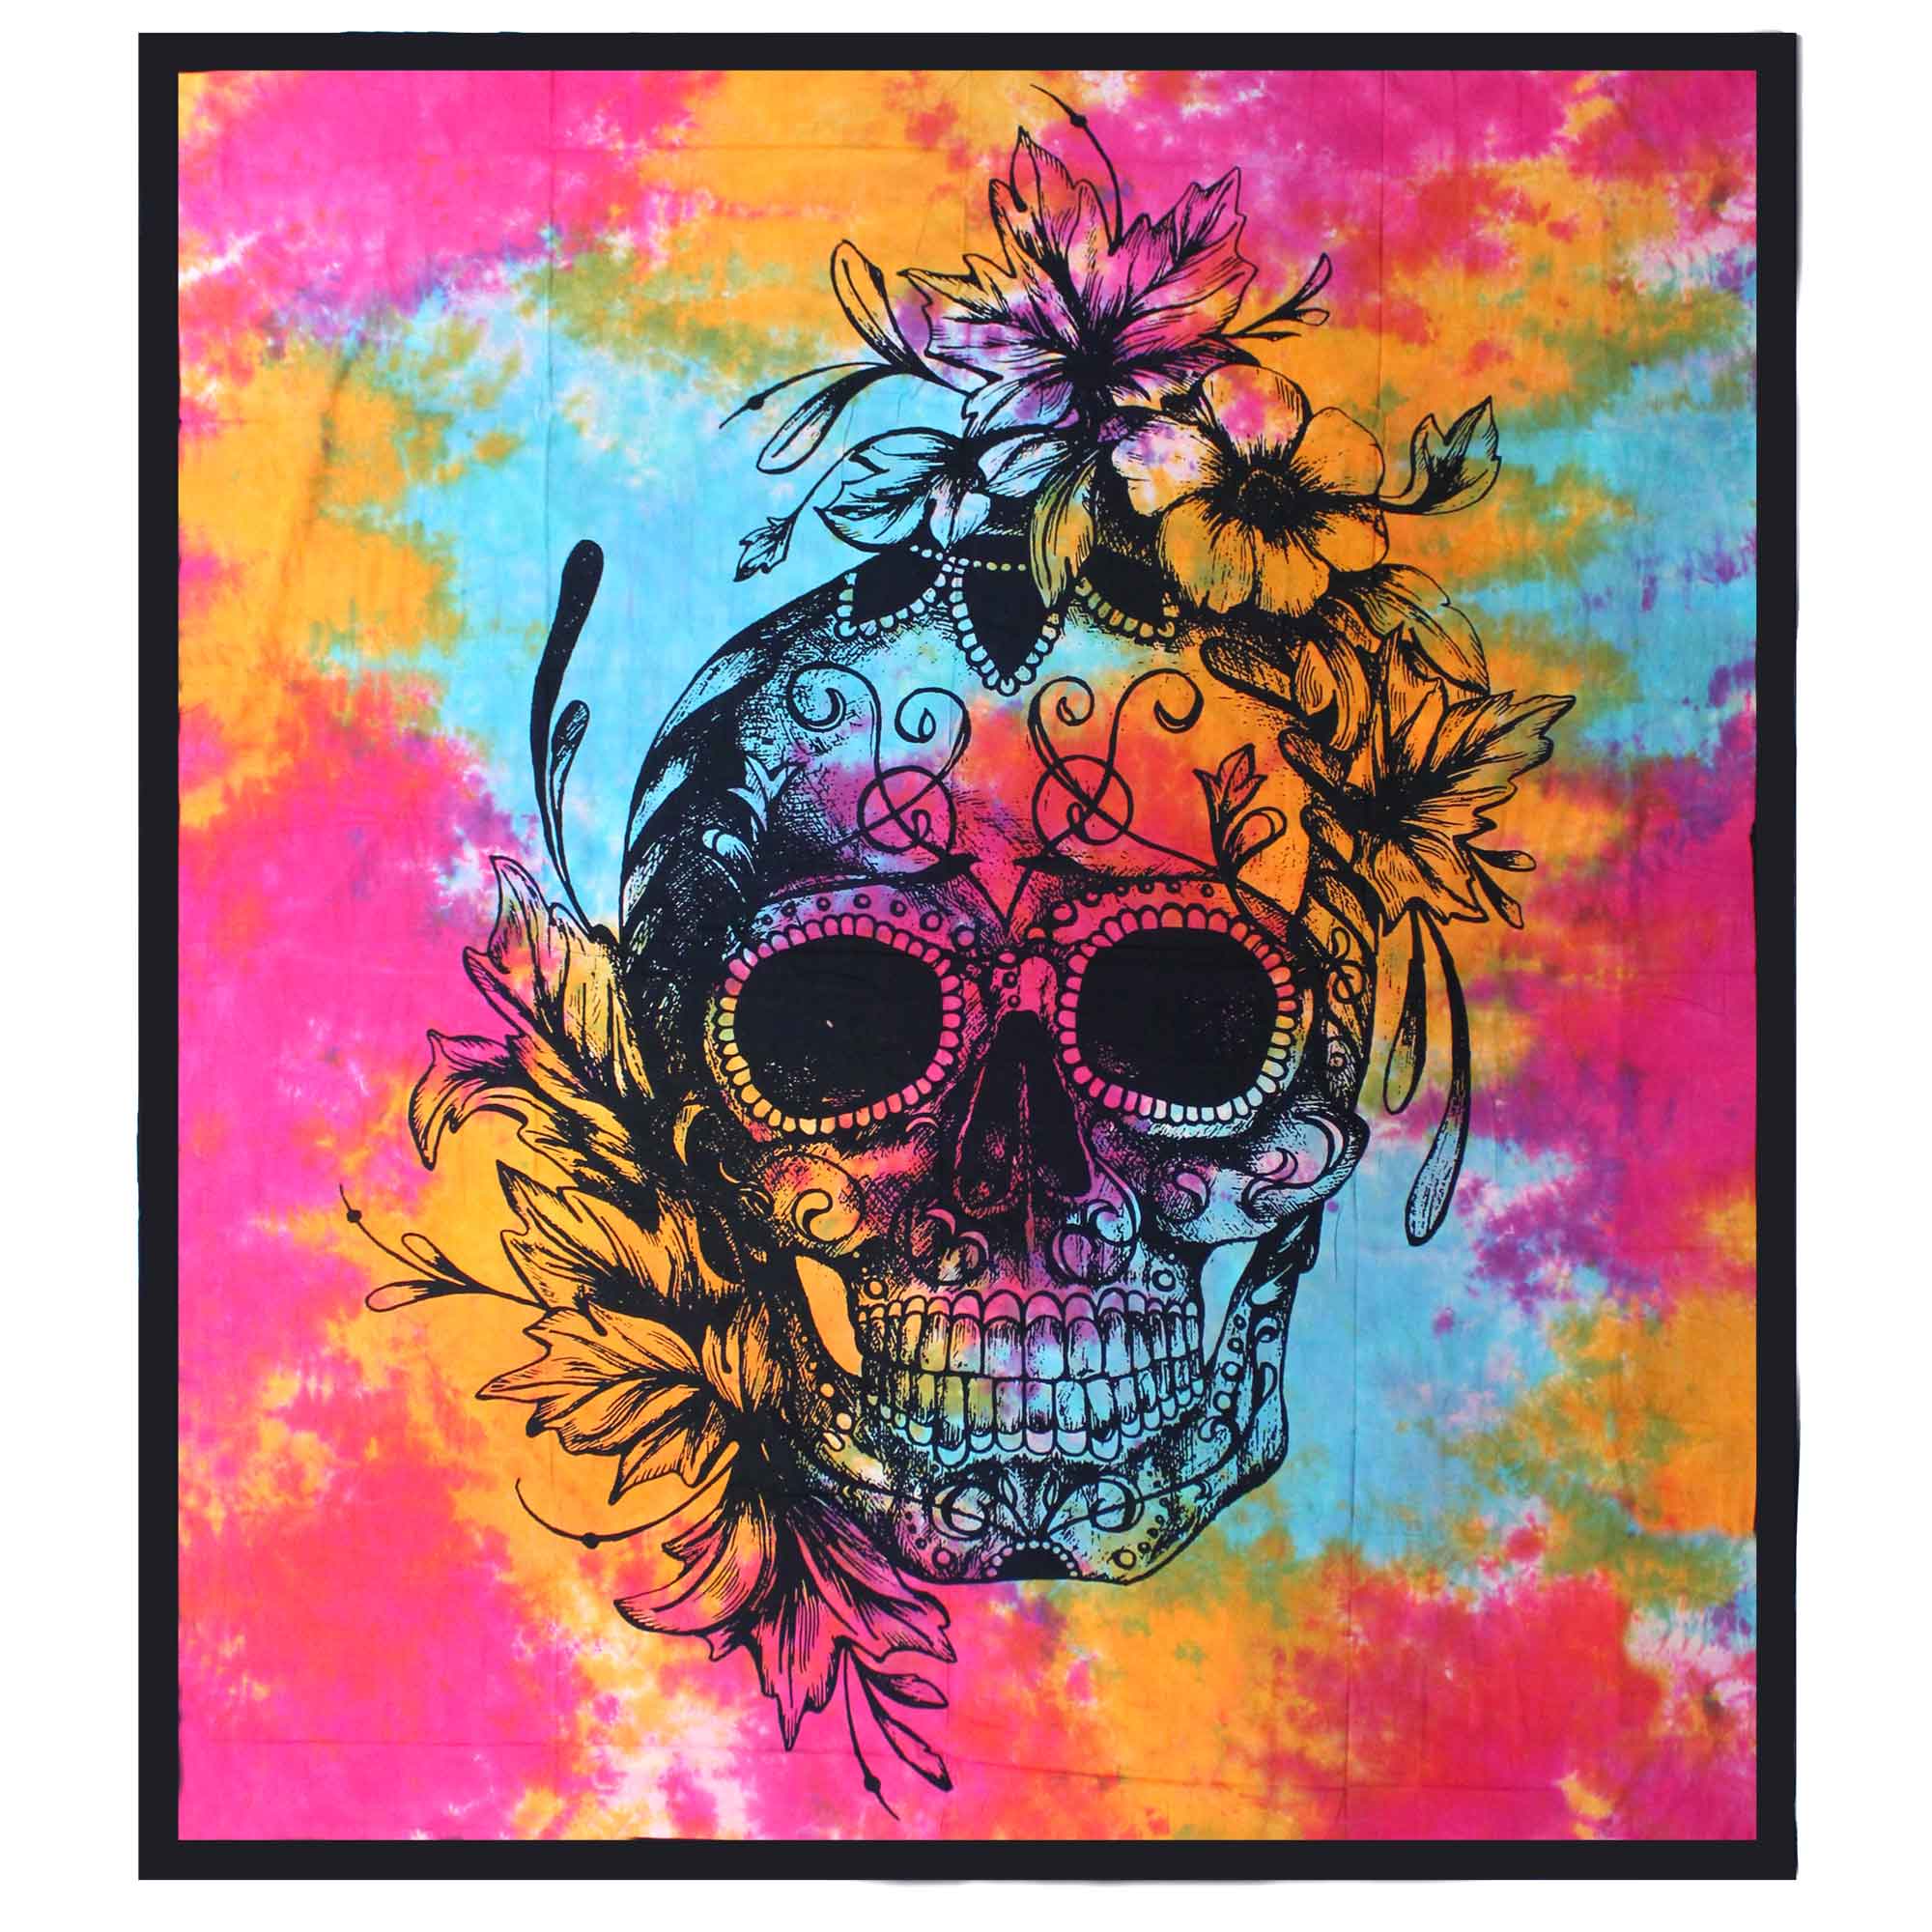 Double Cotton Bedspread + Wall Hanging - Day of the Dead Skull